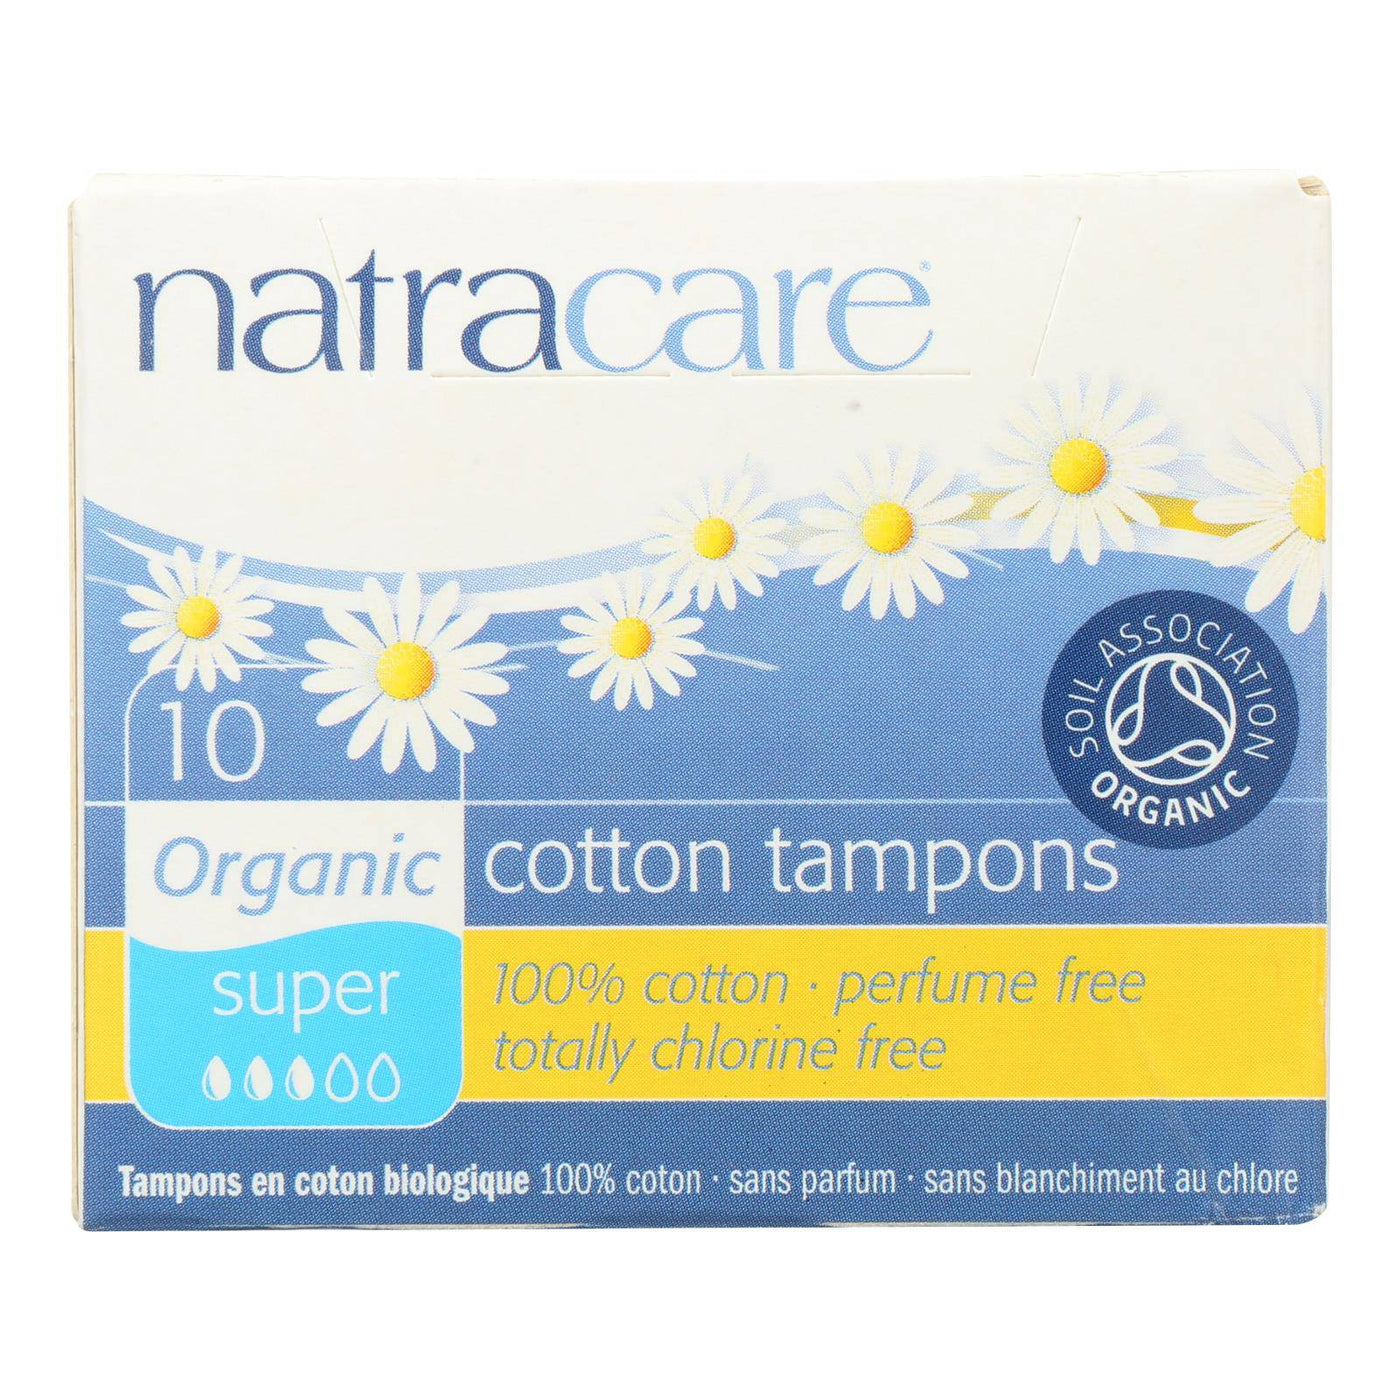 Natracare 100% Organic Cotton Tampons - Super - 10 Pack | OnlyNaturals.us